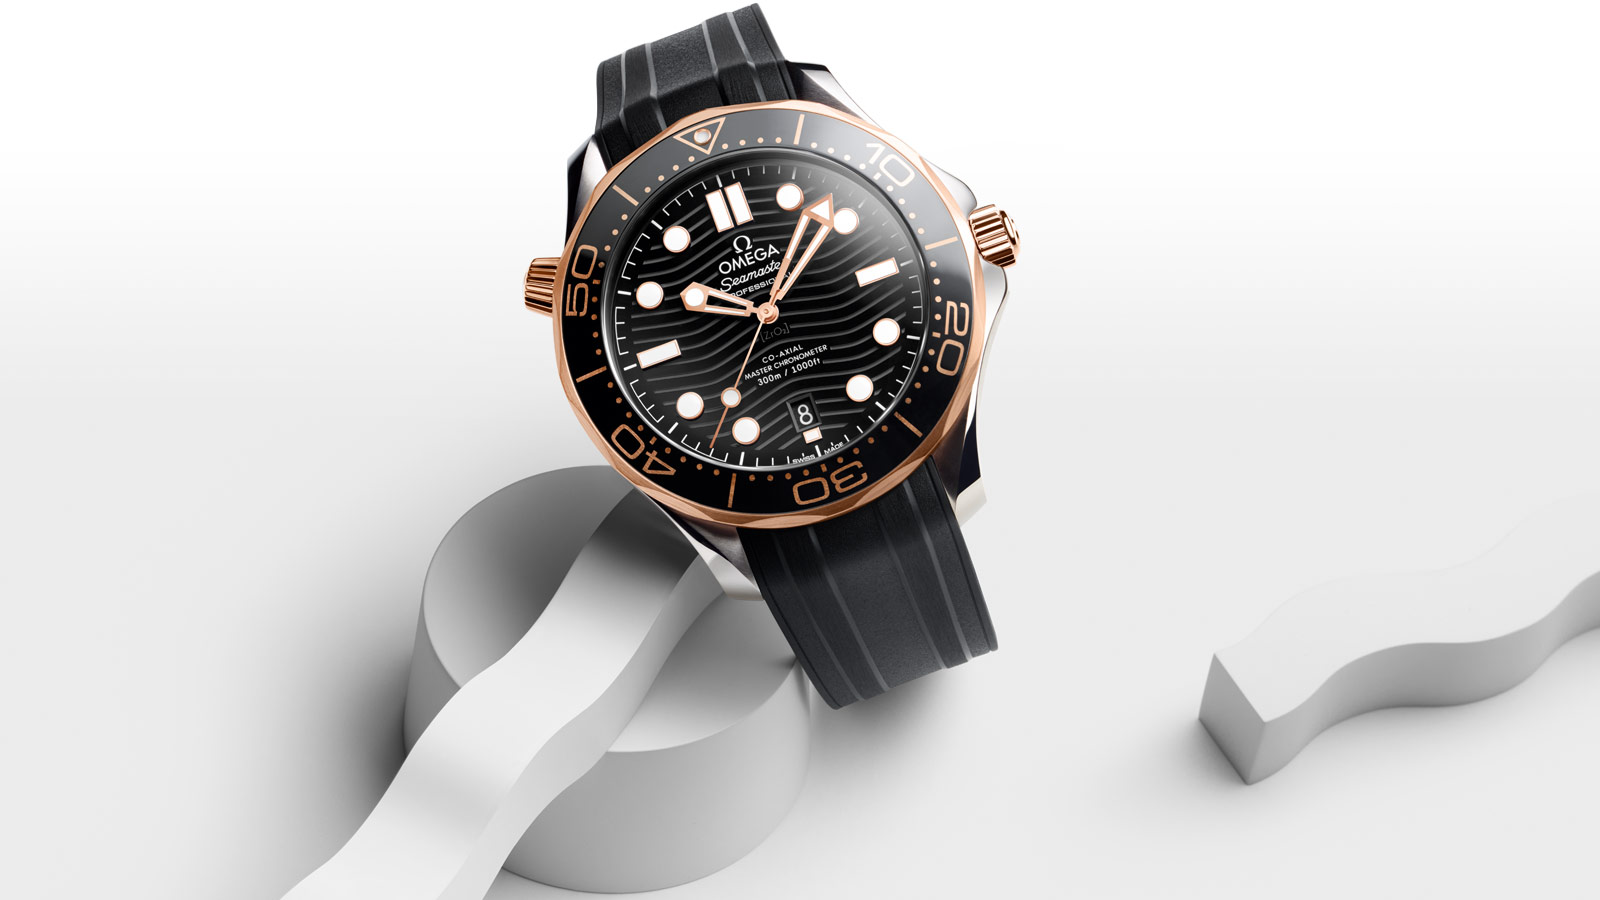 omega watch diver